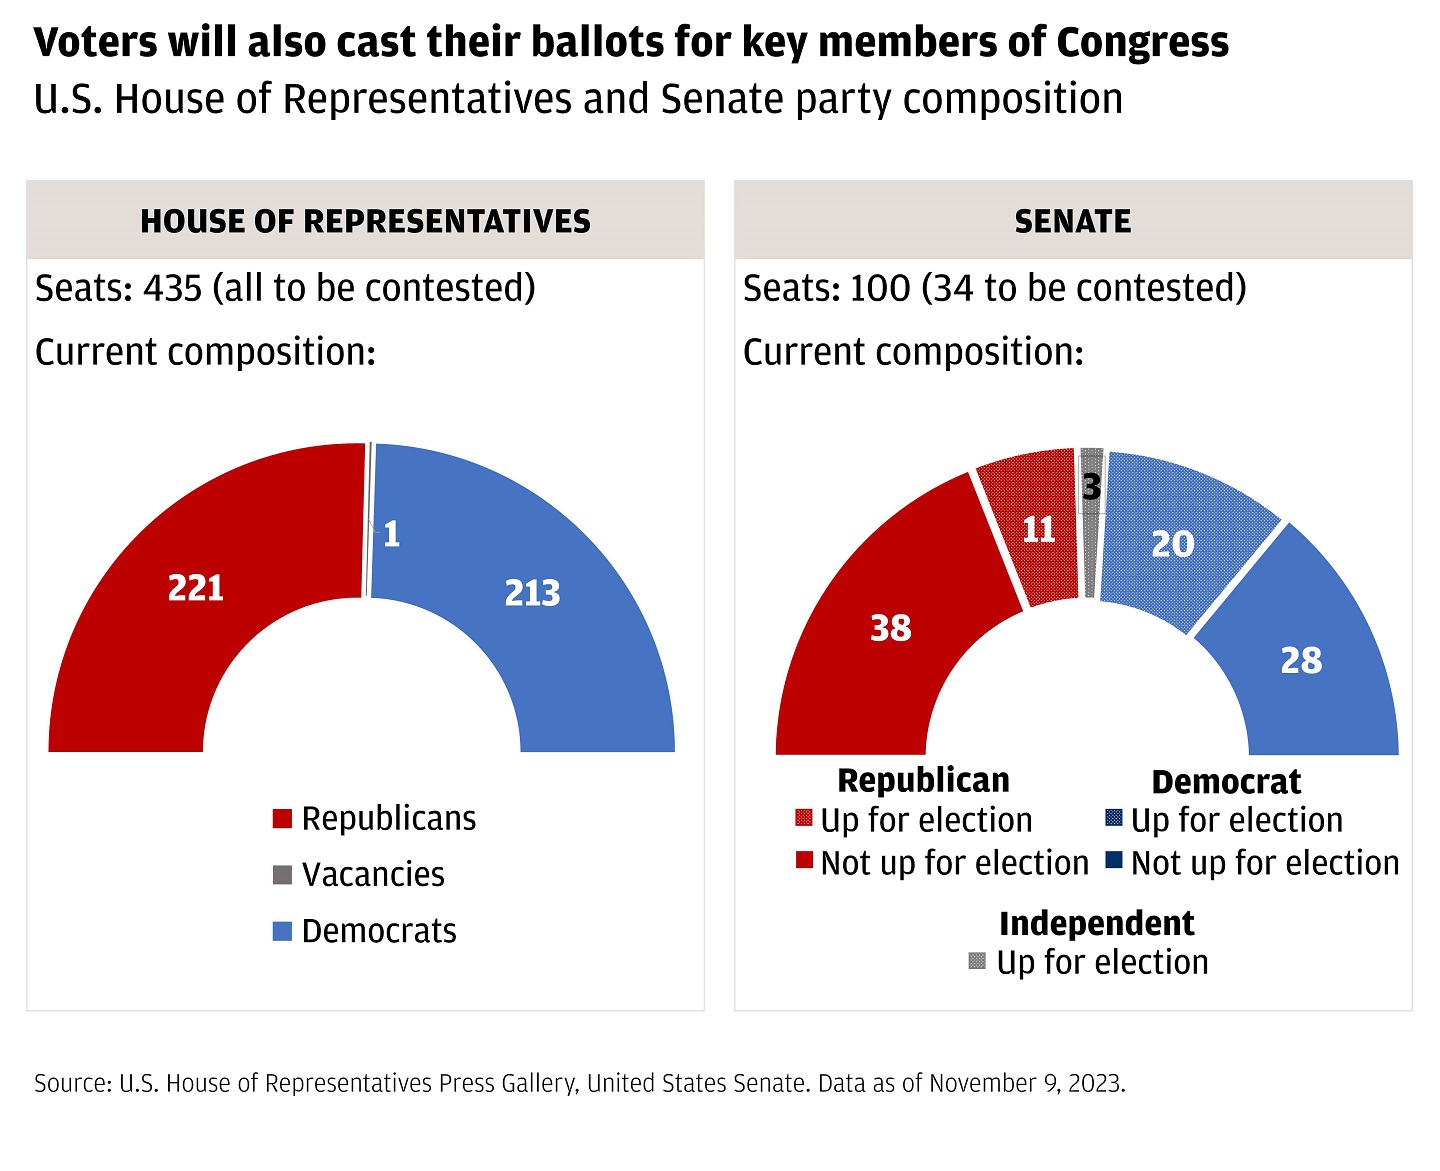 The chart shows two different donut charts representing the split between Republicans and Democrat seats in the House of Representatives.